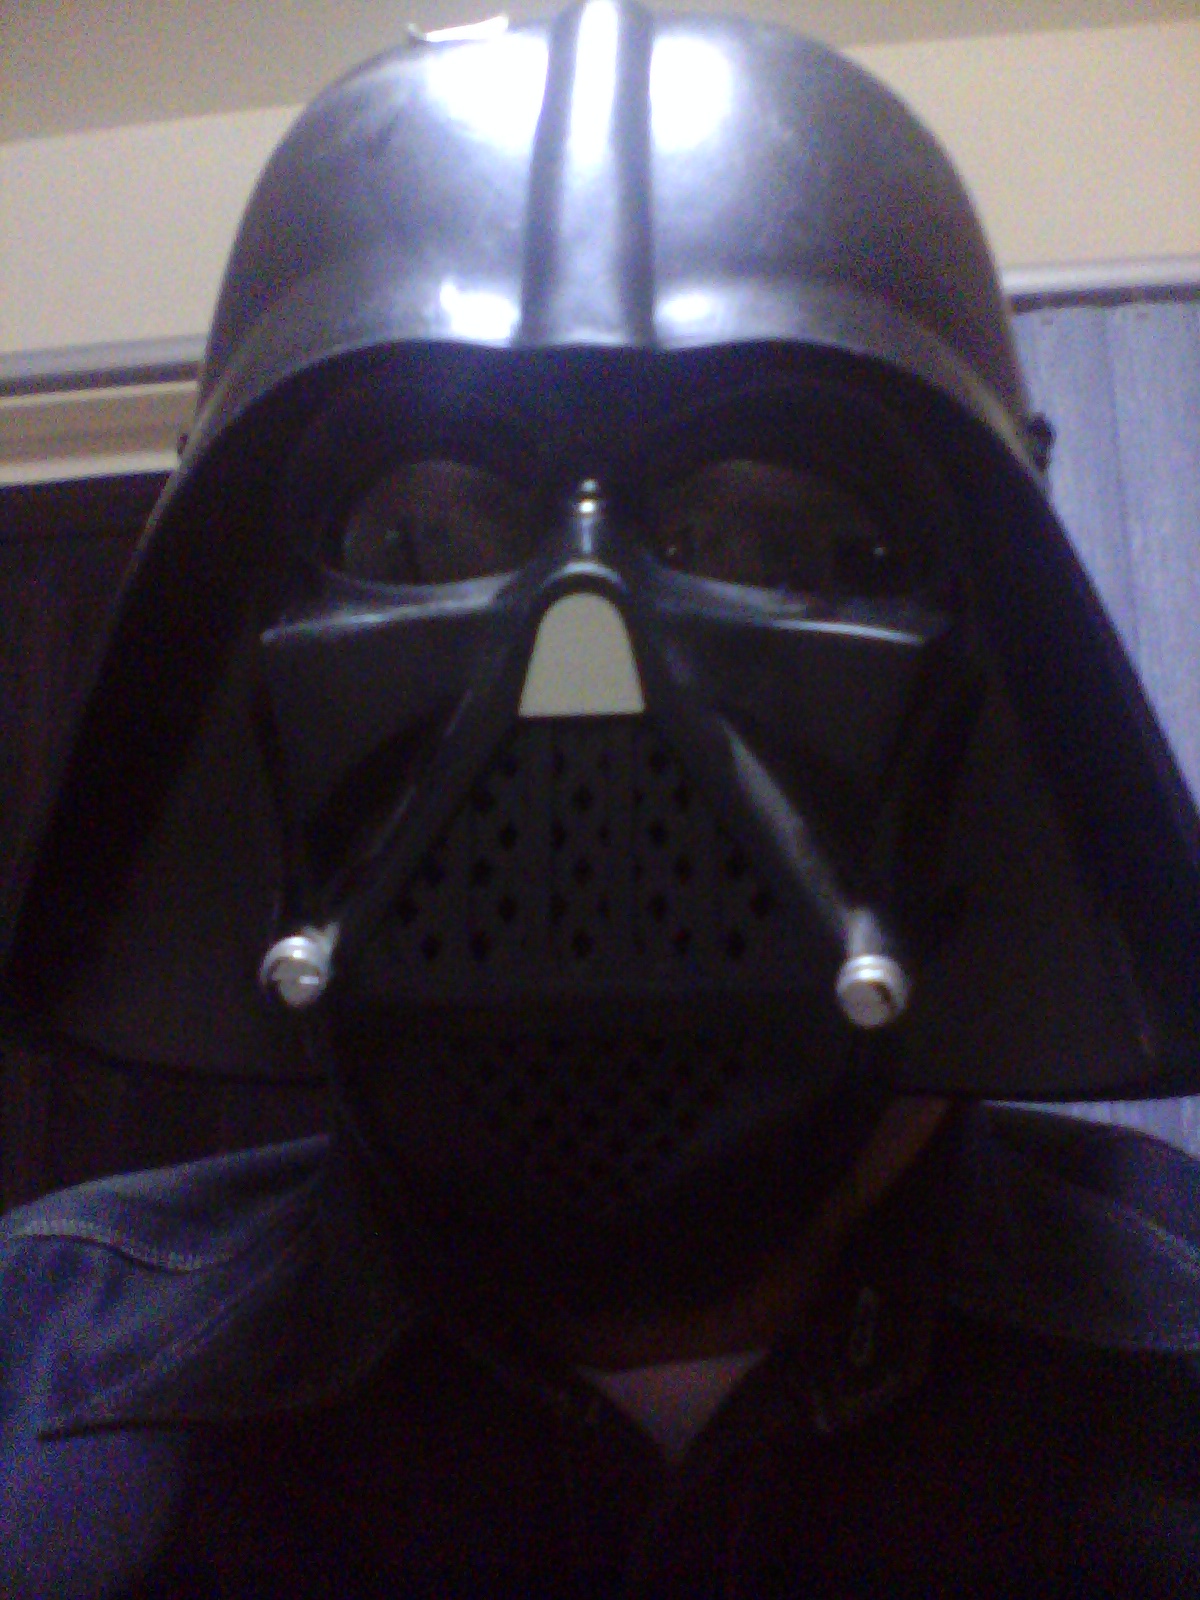 Photo is mine. Yours truly wearing my Darth Vader mask.